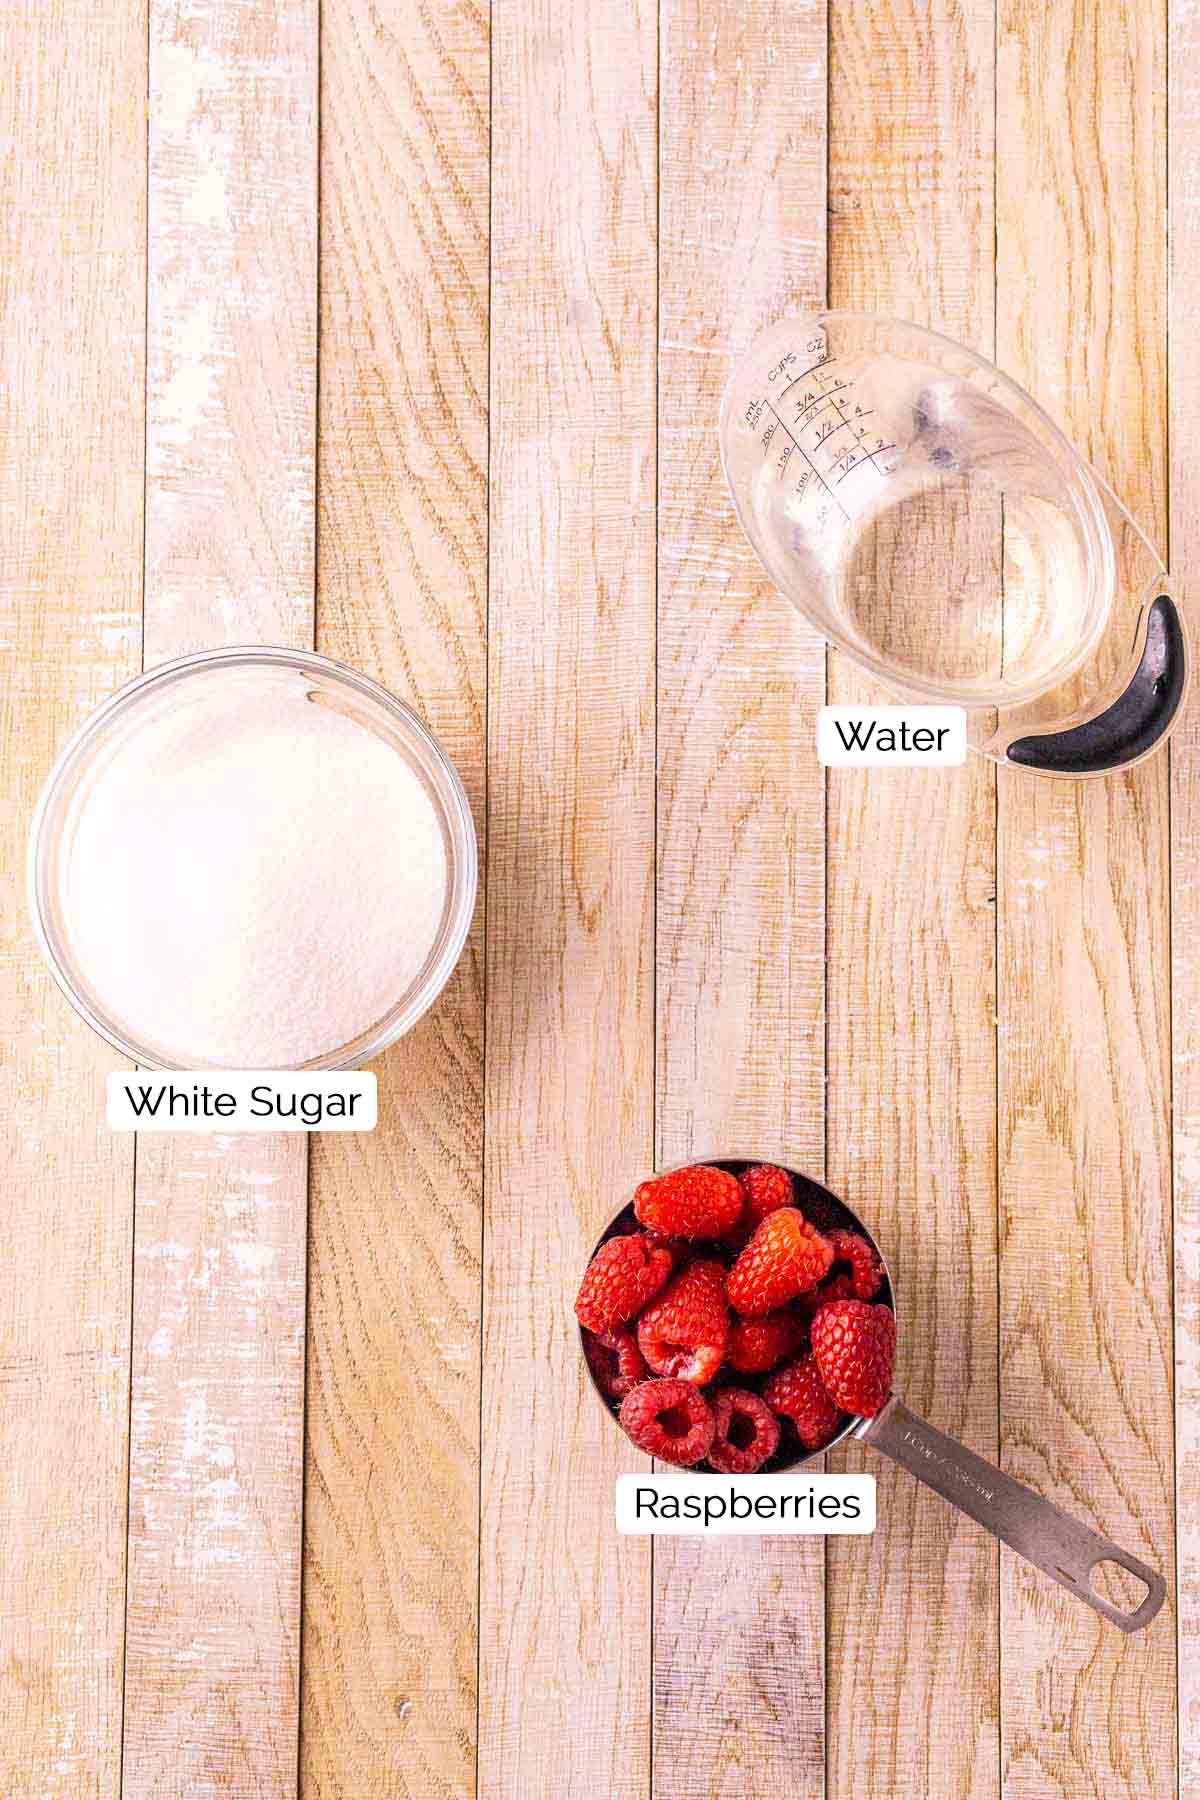 The syrup ingredients on a cream-colored wooden board with black and white labels by the three items.